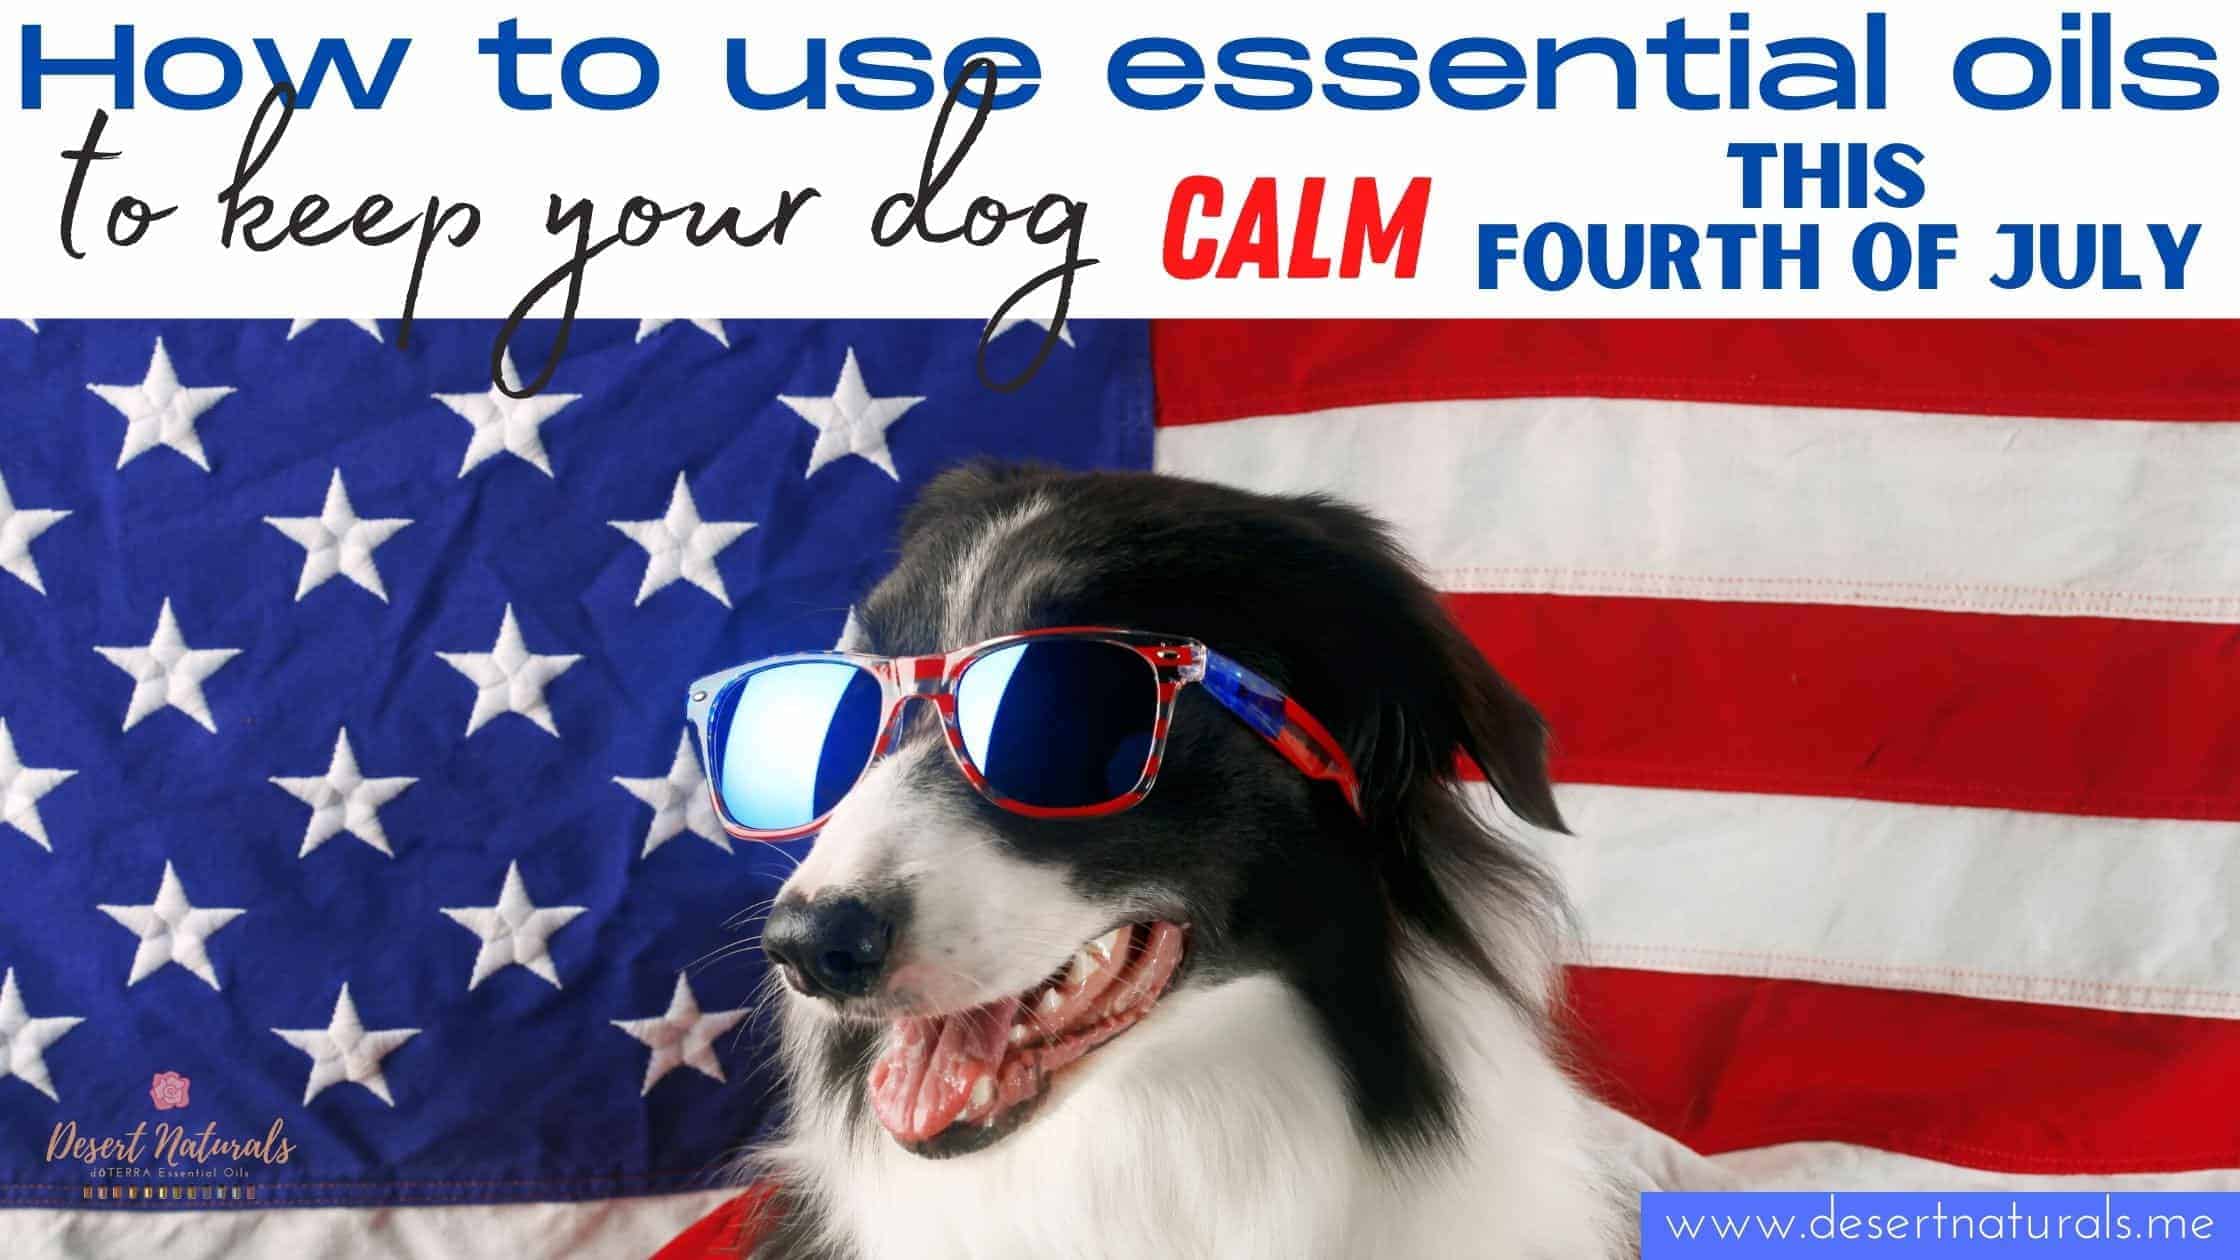 learn how to use essential oils in a safe way to help your dog be calm on independence day